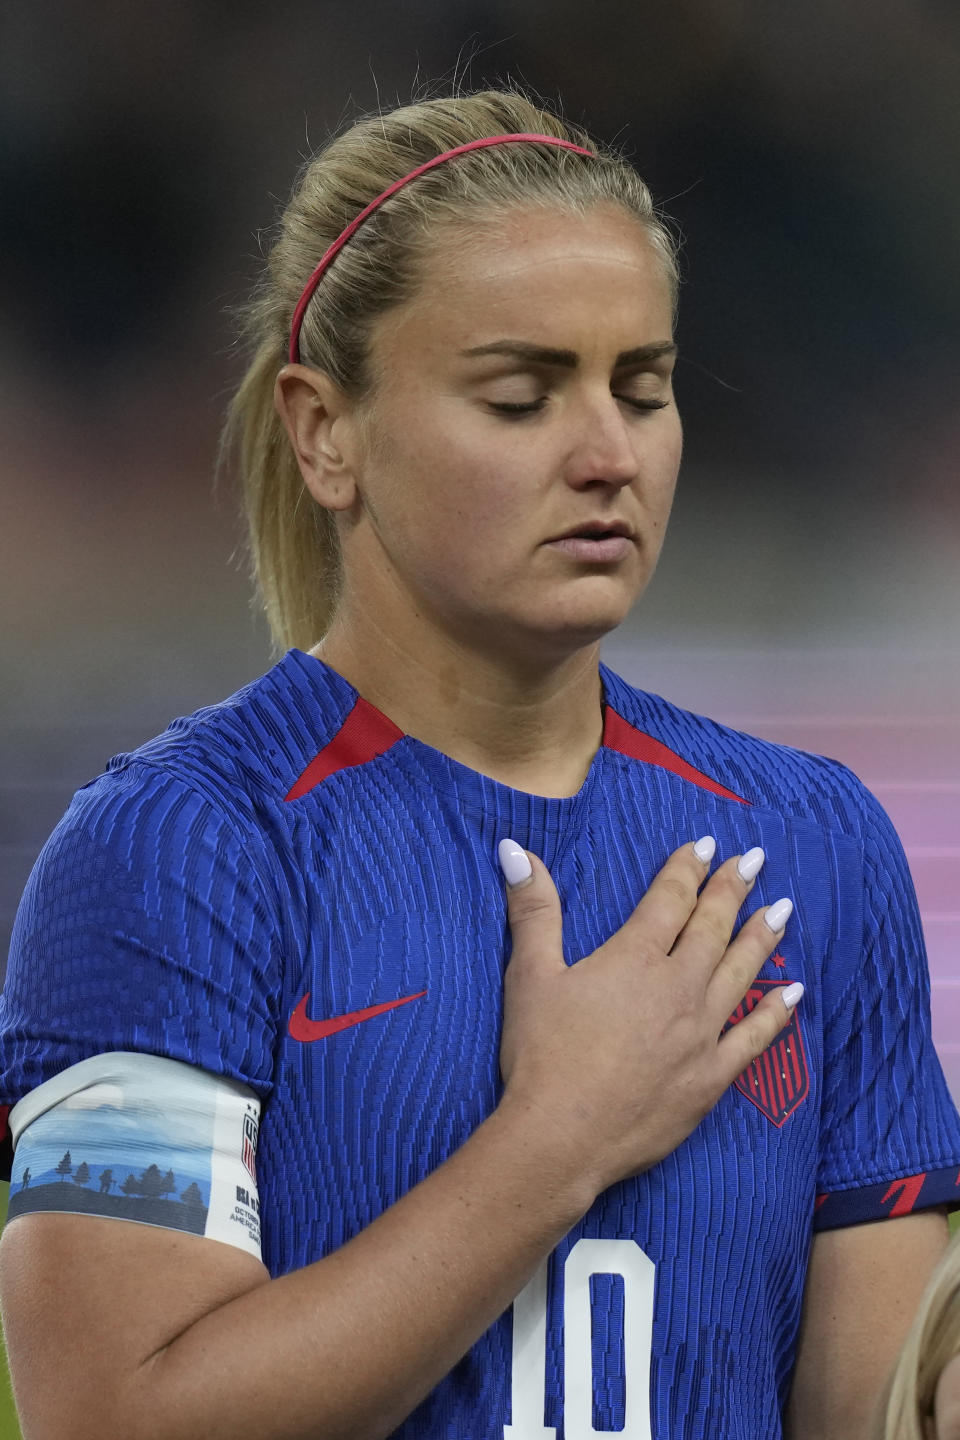 U.S. midfielder Lindsey Horan puts her hand over her heart during the national anthem before the team's international friendly soccer match against Colombia on Thursday, Oct. 26, 2023, in Sandy, Utah. (AP Photo/Rick Bowmer)